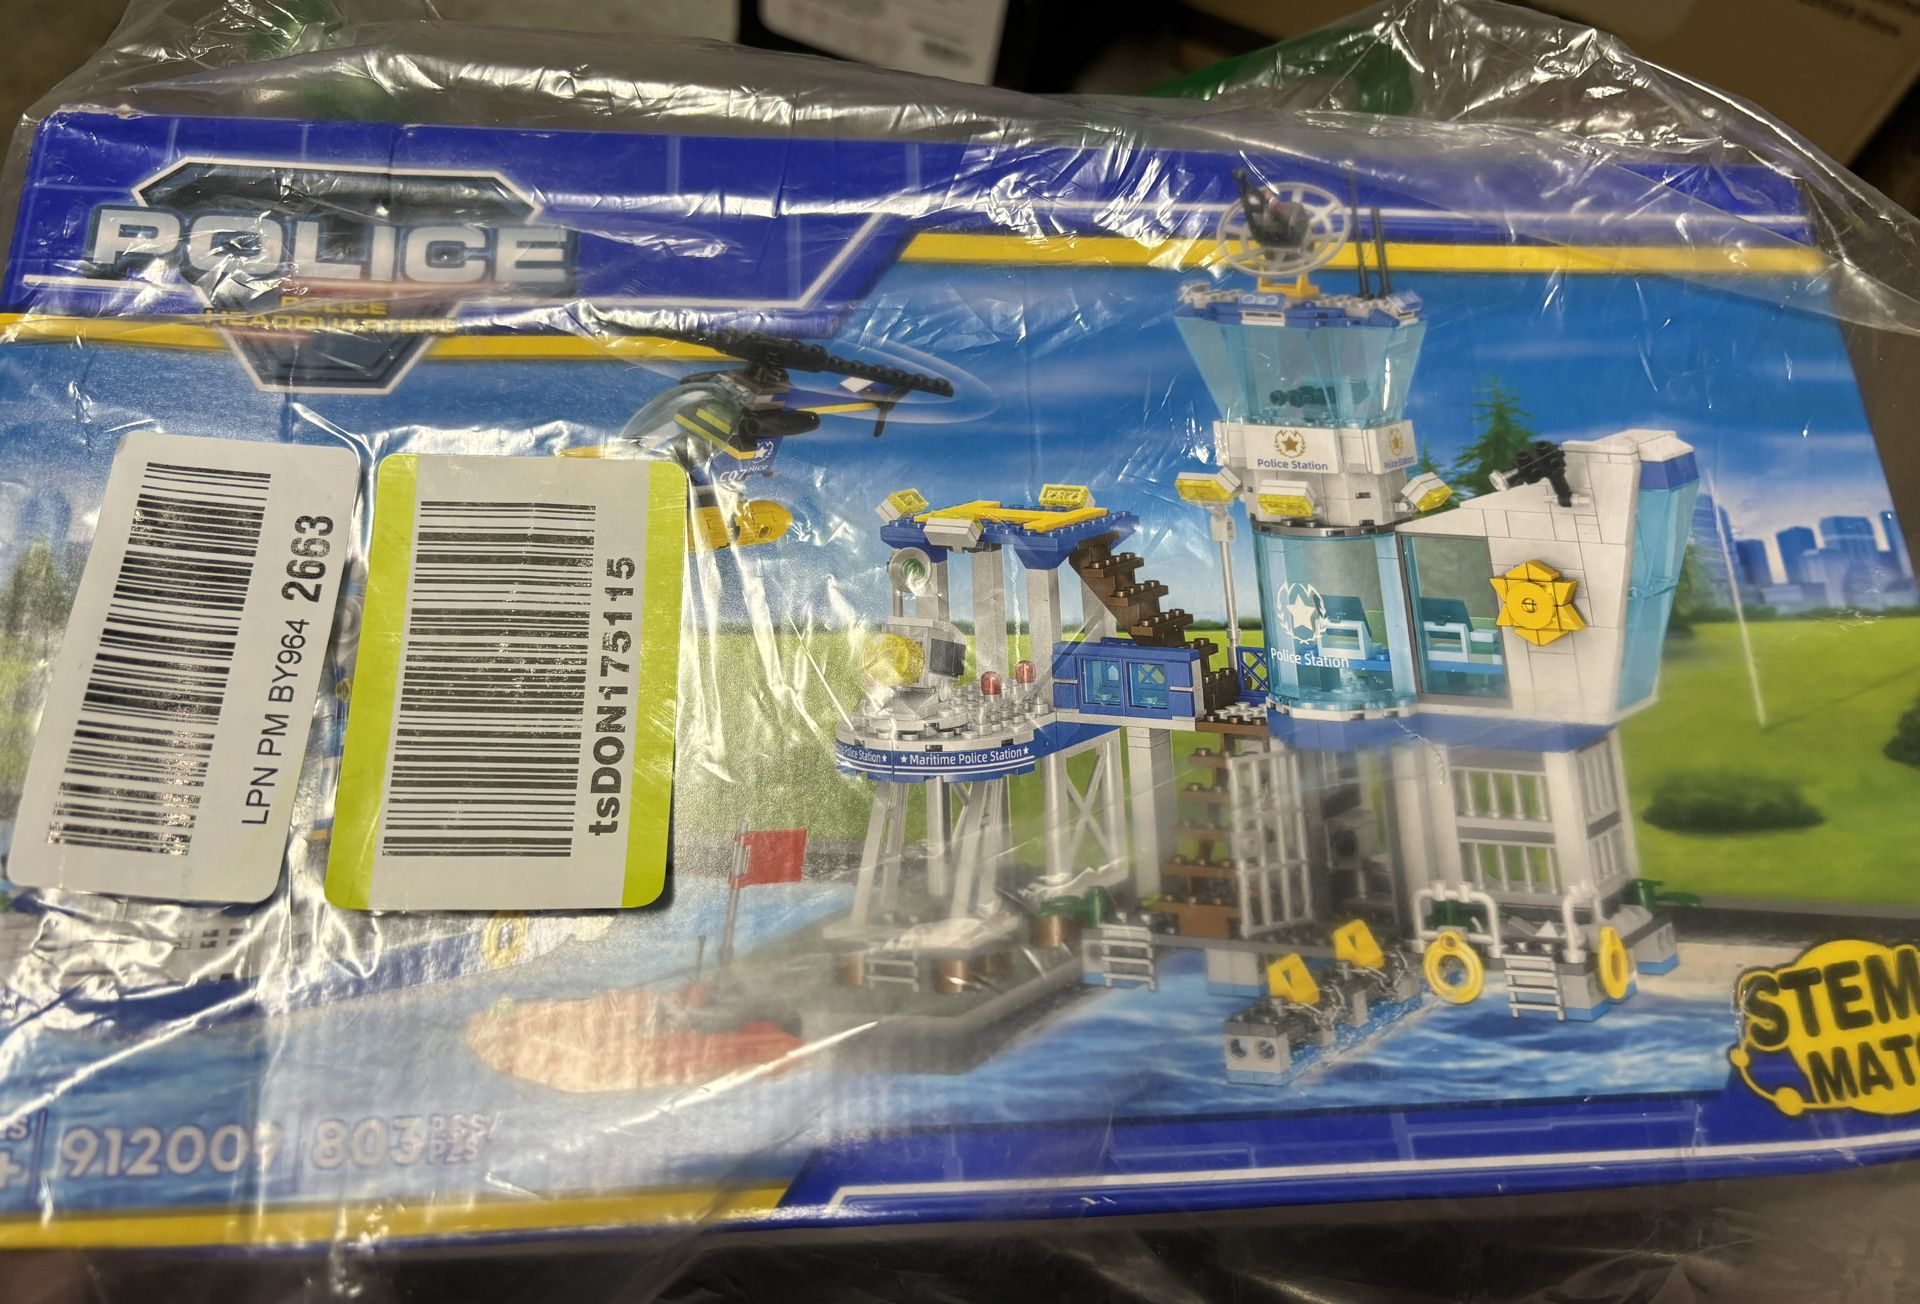 For Sale City Police Station Building Sets, 850 Pieces STEM Toy with Helicopter, Airplane, Boat, Marine Police Station, Gift for Kids Ages 6-12